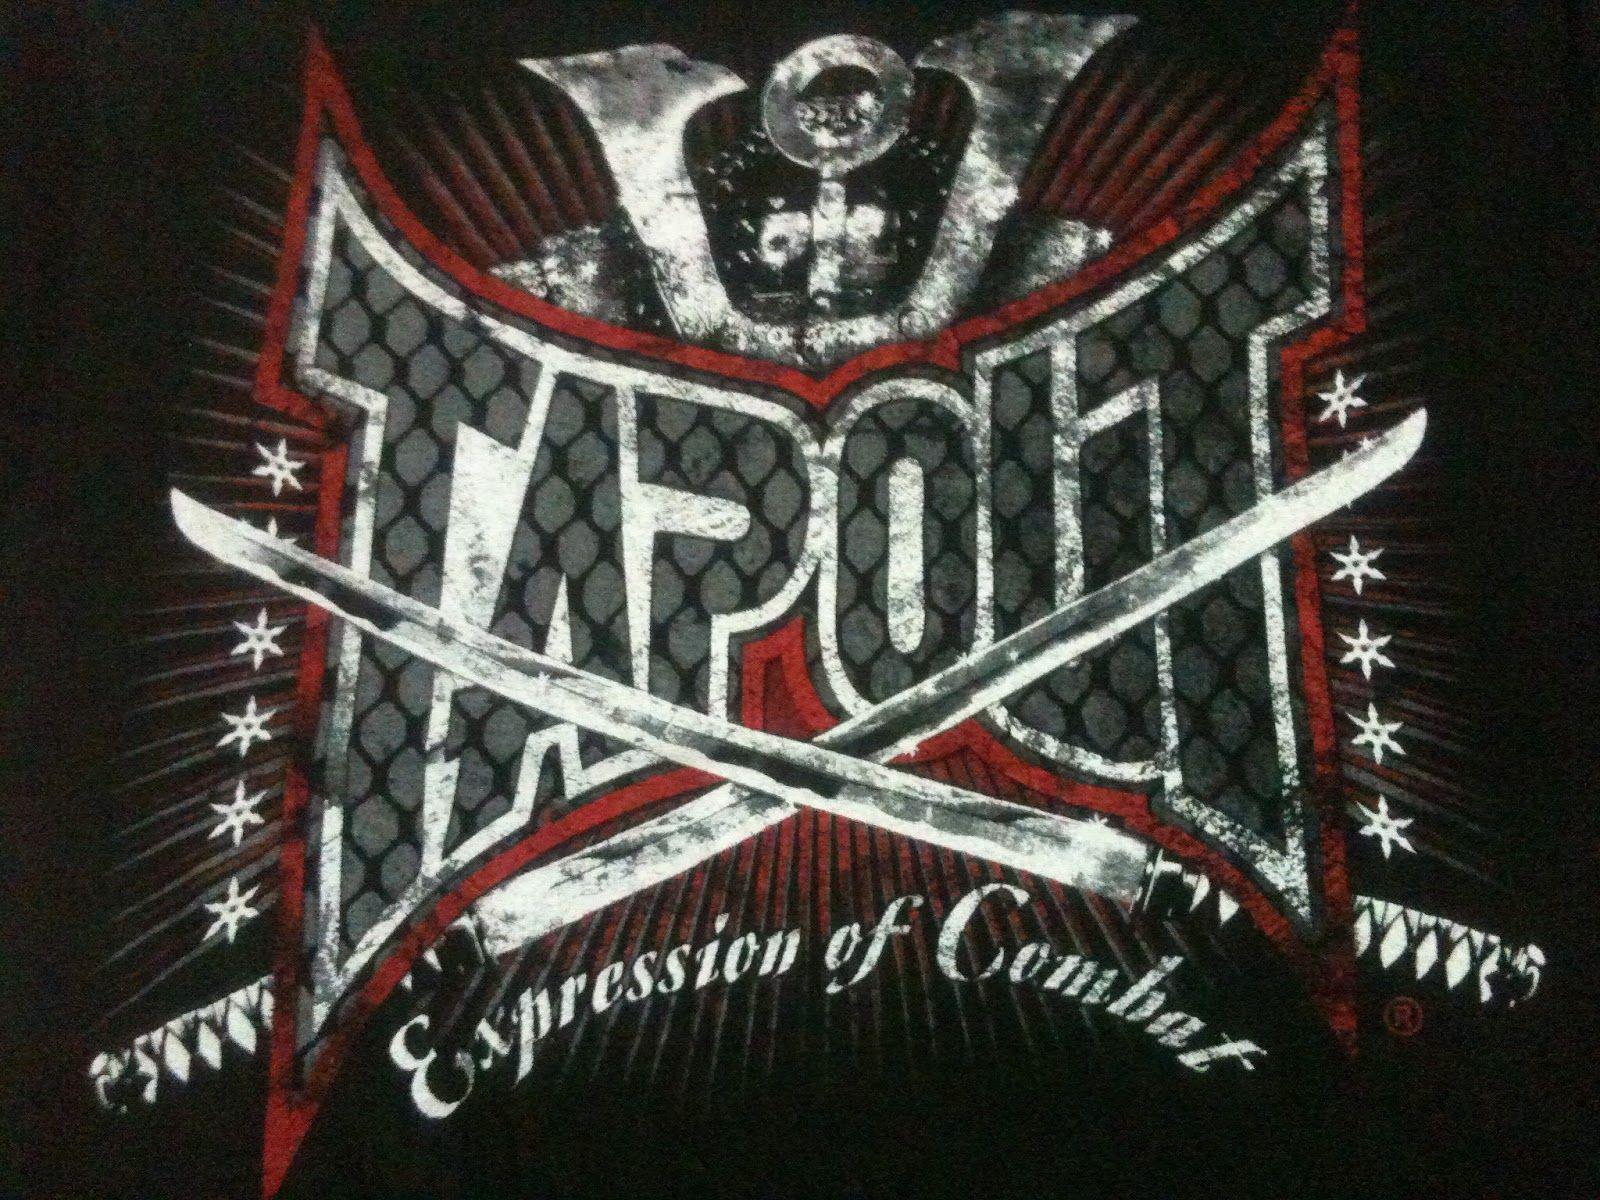 Download Tapout Wallpaper 3001 1600x1200 px High Resolution